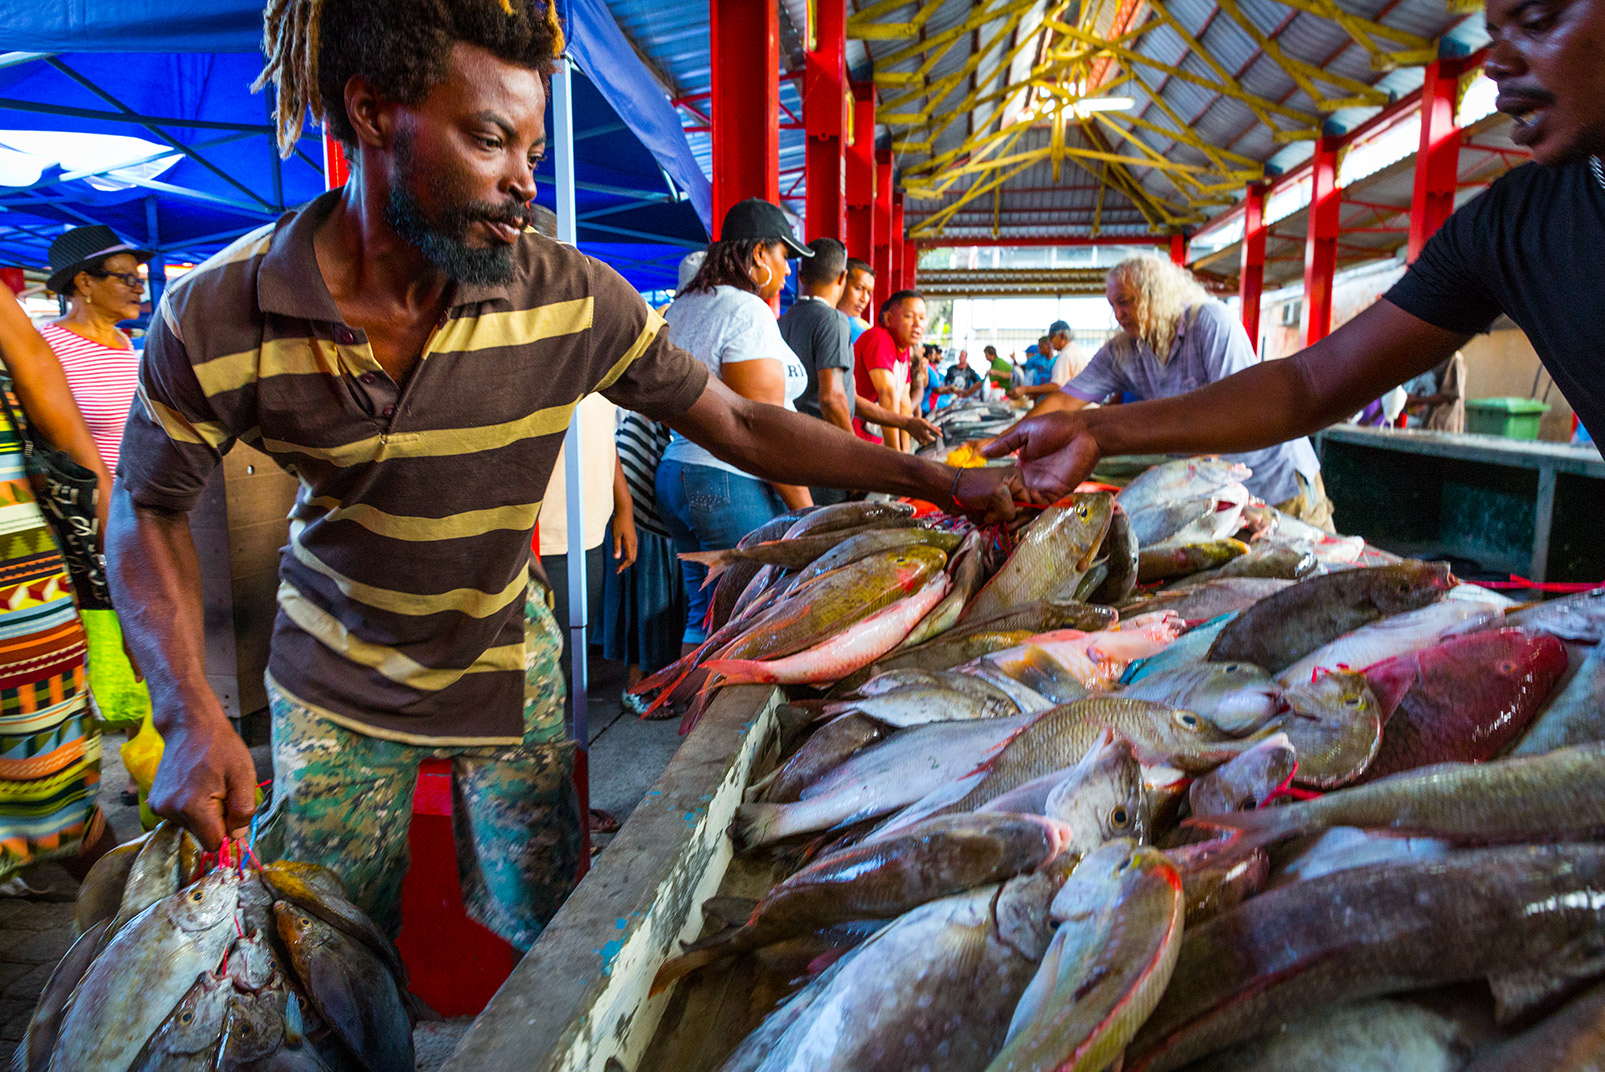 Victoria Market, Houston says, was bustling and dynamic every day of the week. There fishermen, like the man on the left, load their fish onto stands in the morning. “The connection to local fresh fish is just part of Seychelles culture,” Houston says. Local and artisanal fishing is even written into the country’s constitution. Photo © Jason Houston 